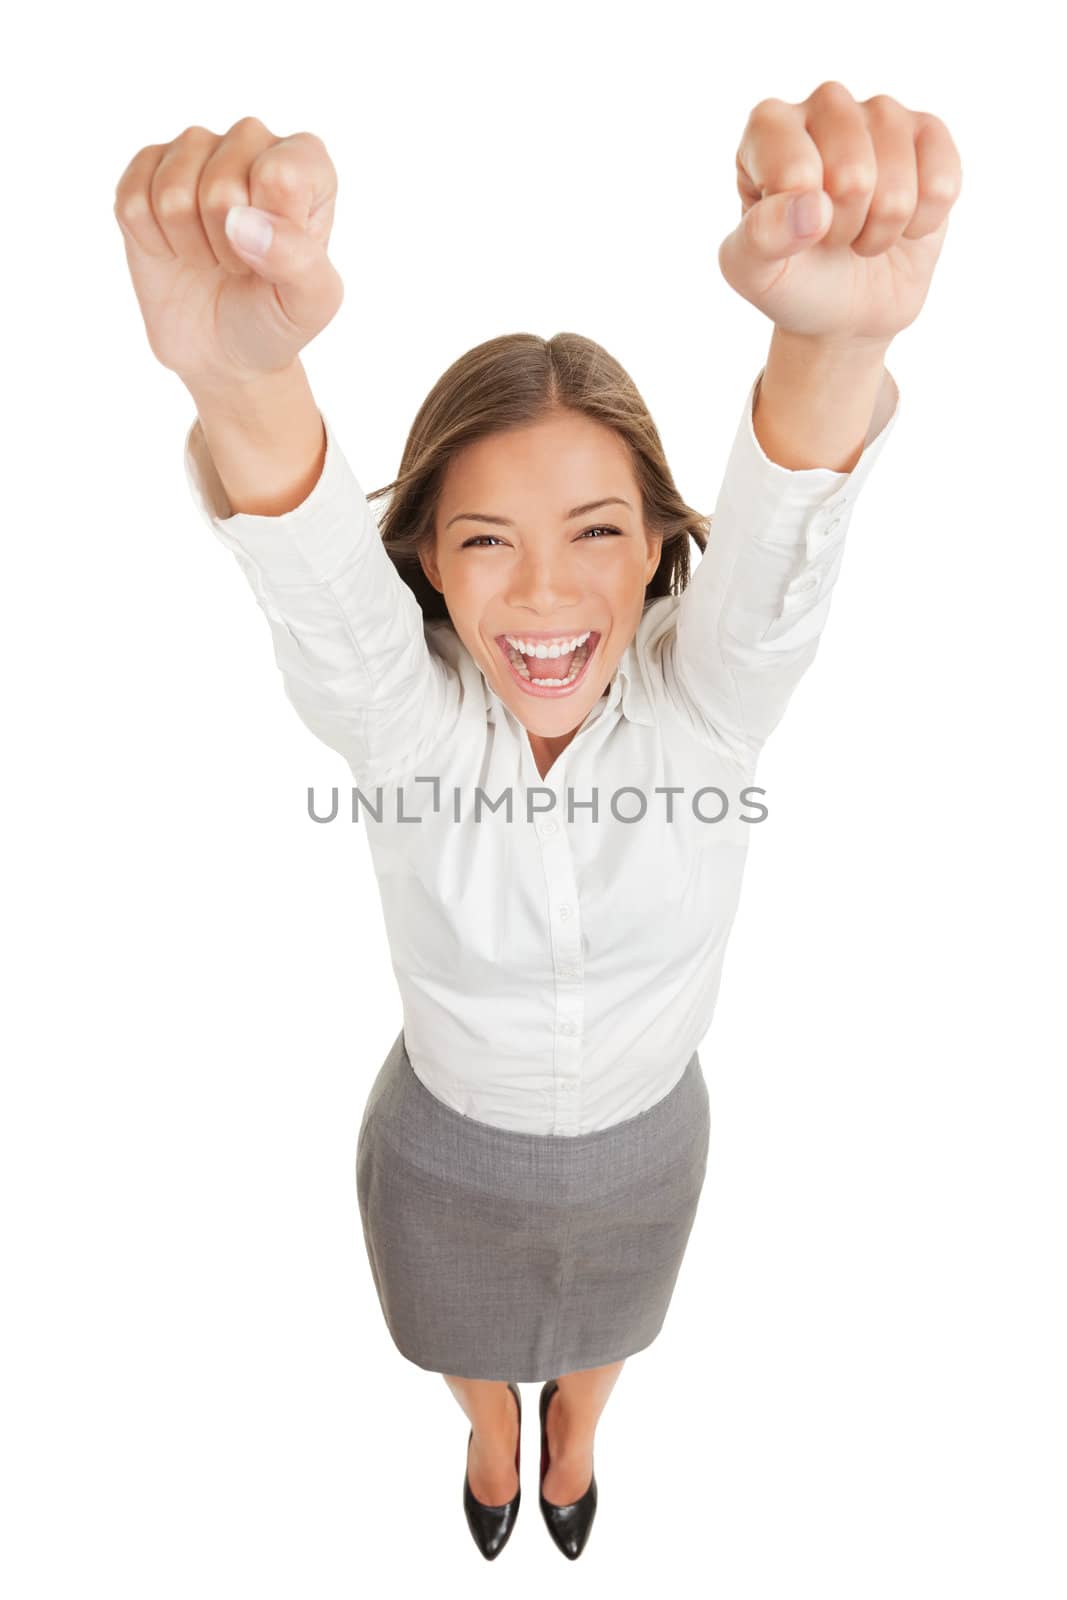 Ecstatic happy woman cheering and winning. Humorous high angle perspective of a beautiful winner woman laughing and celebrating as she raises her hands in the air in jubilation, isolated on white.